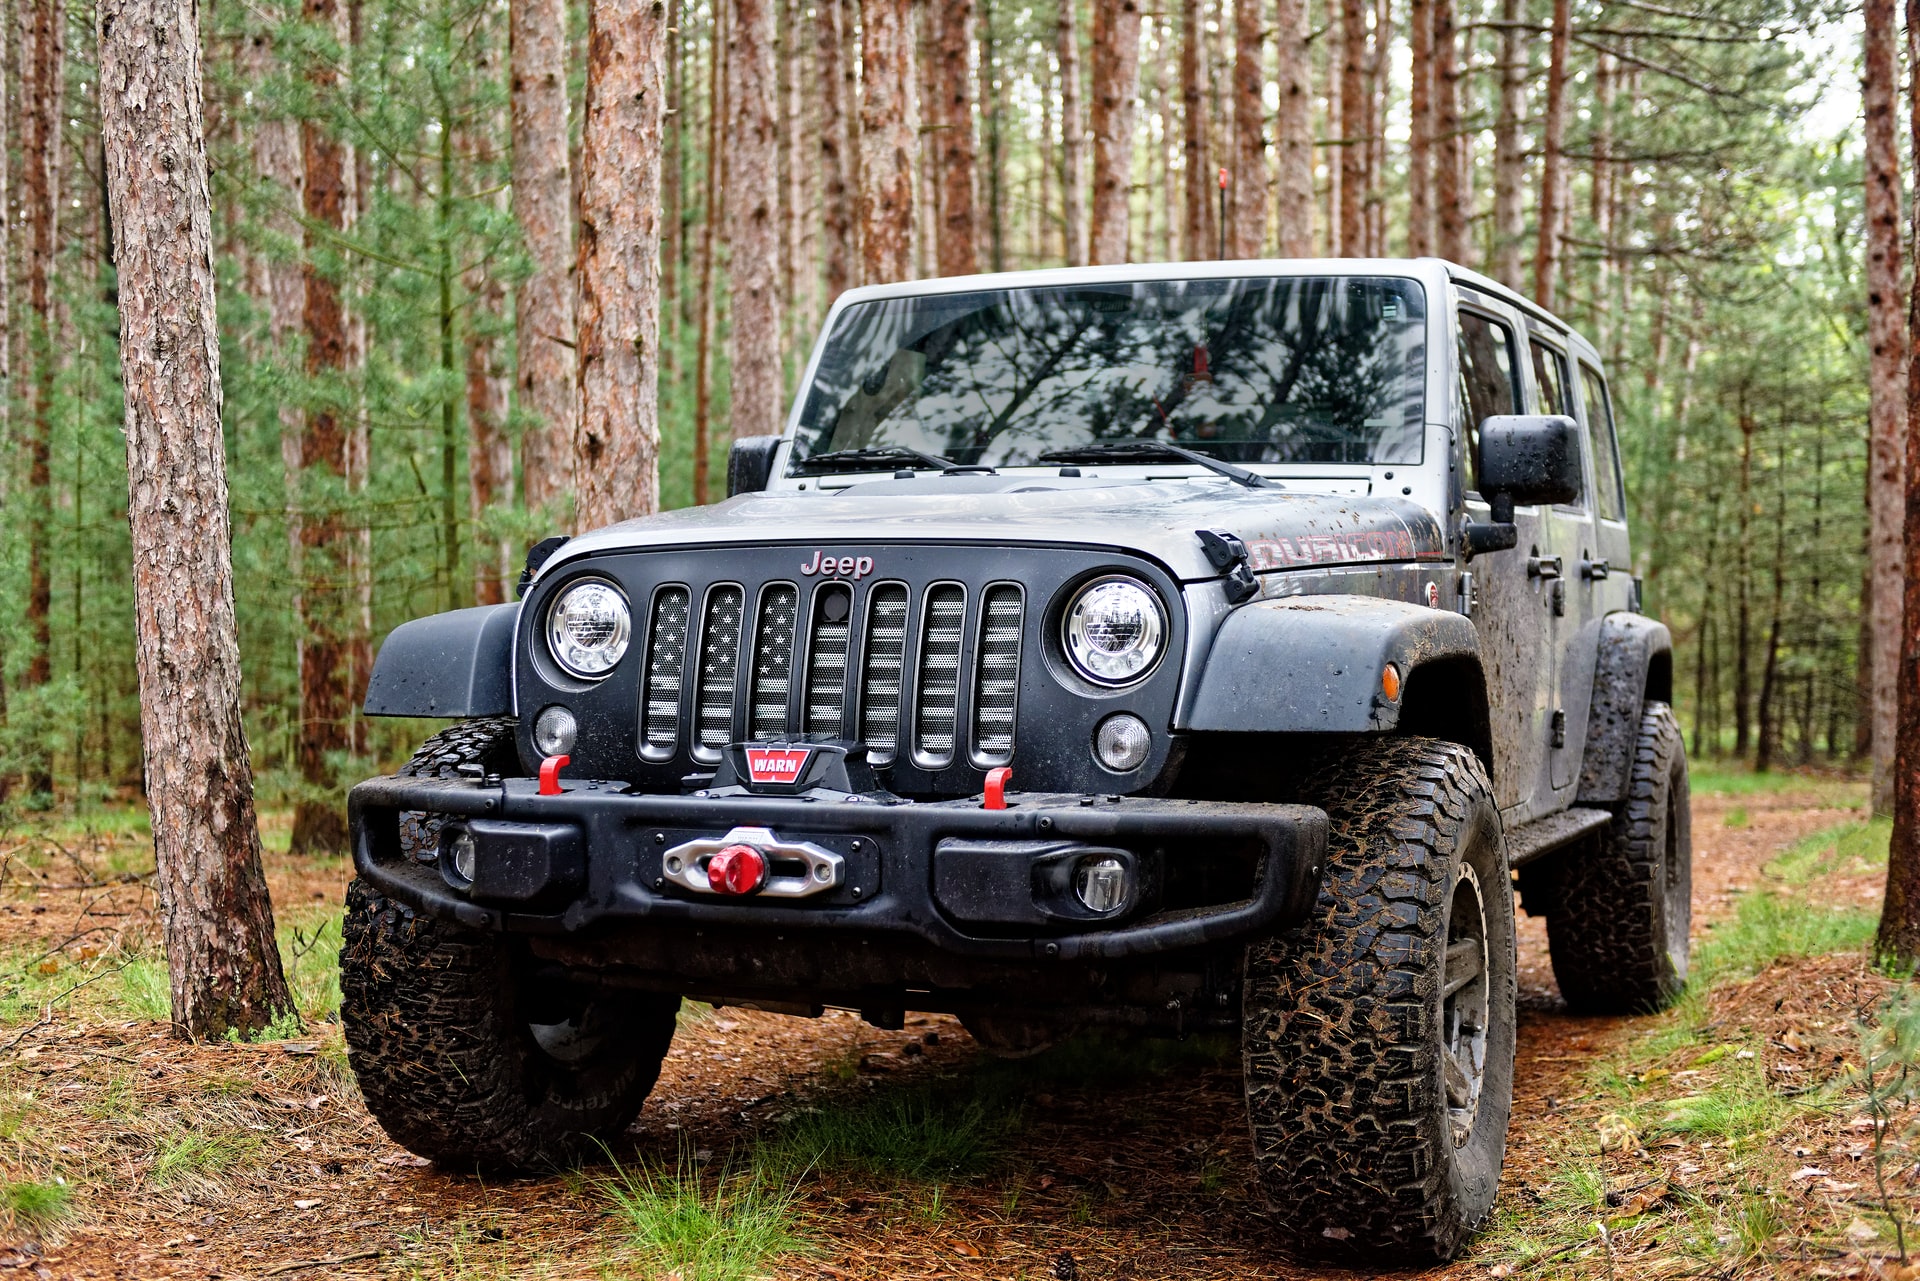 The Best Time to Buy a Jeep Wrangler